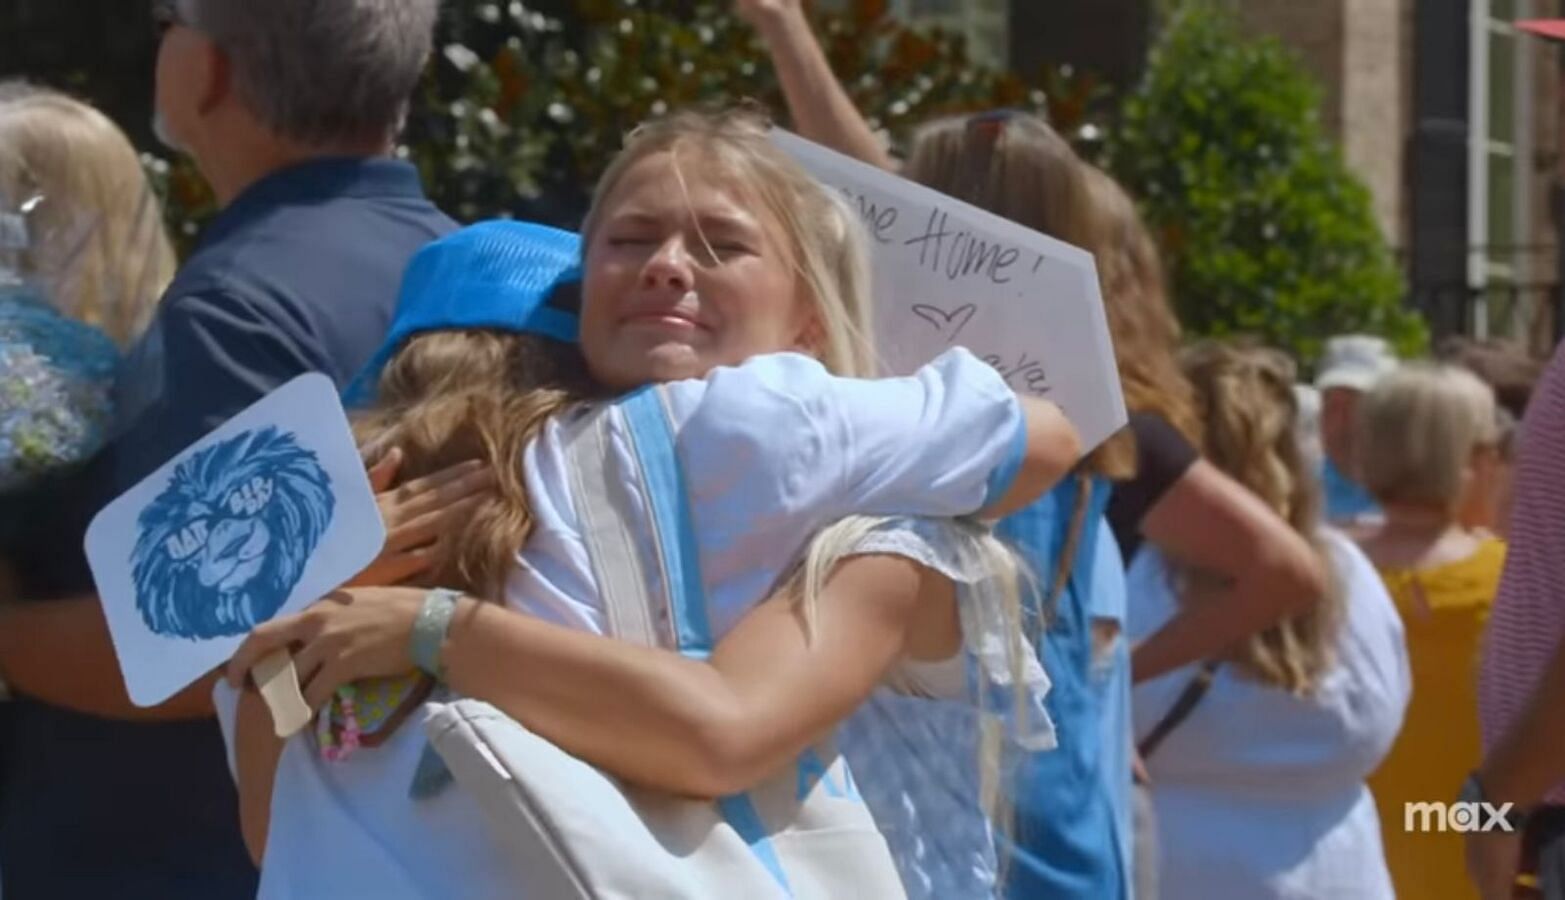 Two young women hug each other as they pass one of the challenges in the rush (Image via HBO)